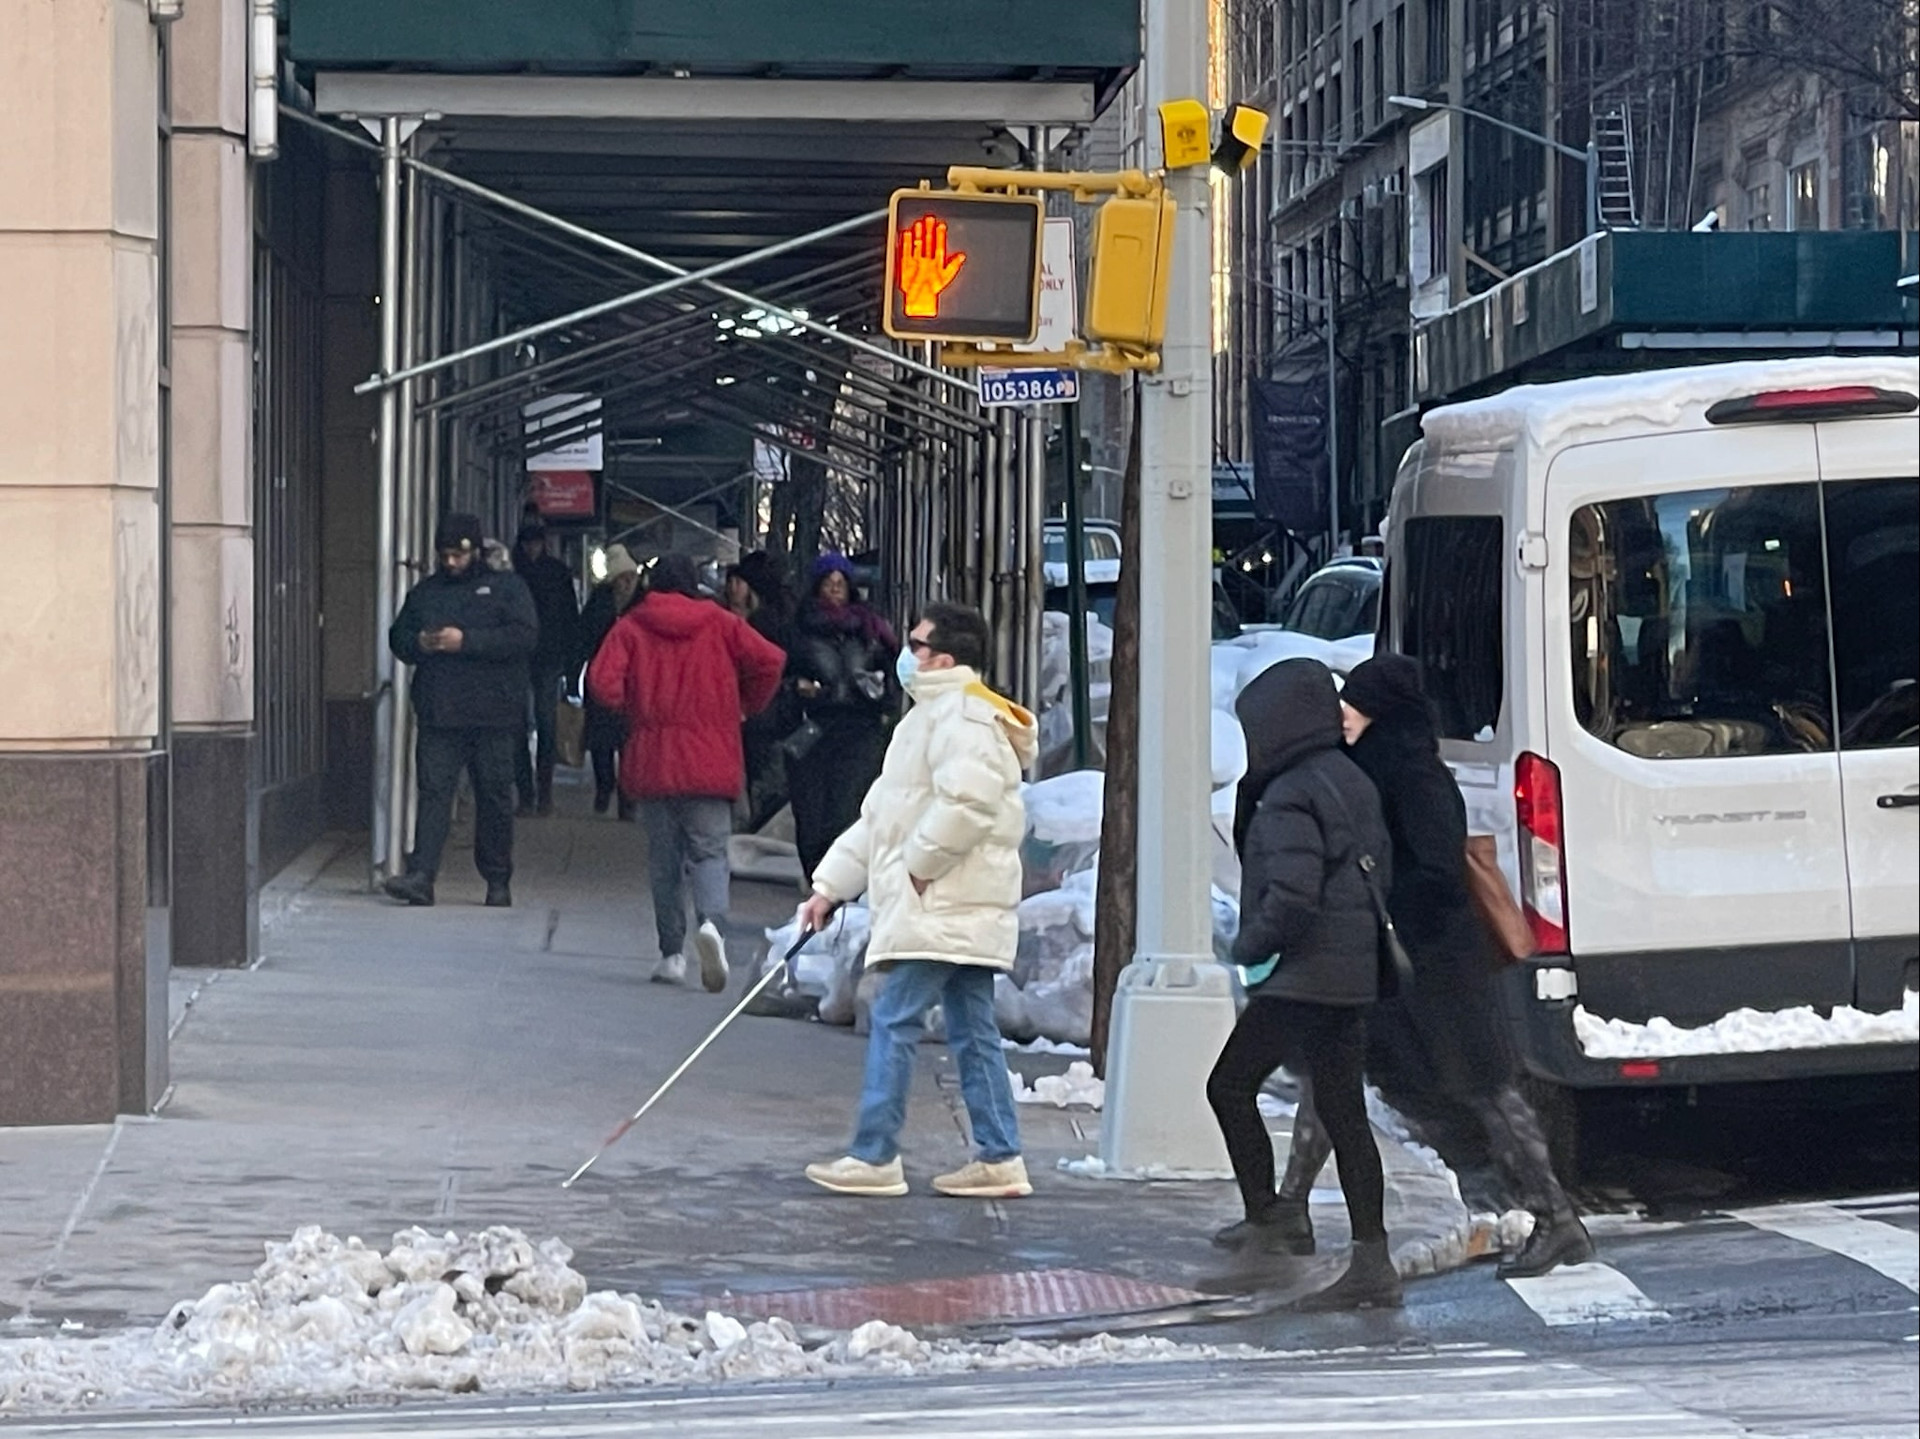 A pedestrian with a visual impairment crossing the street in New York